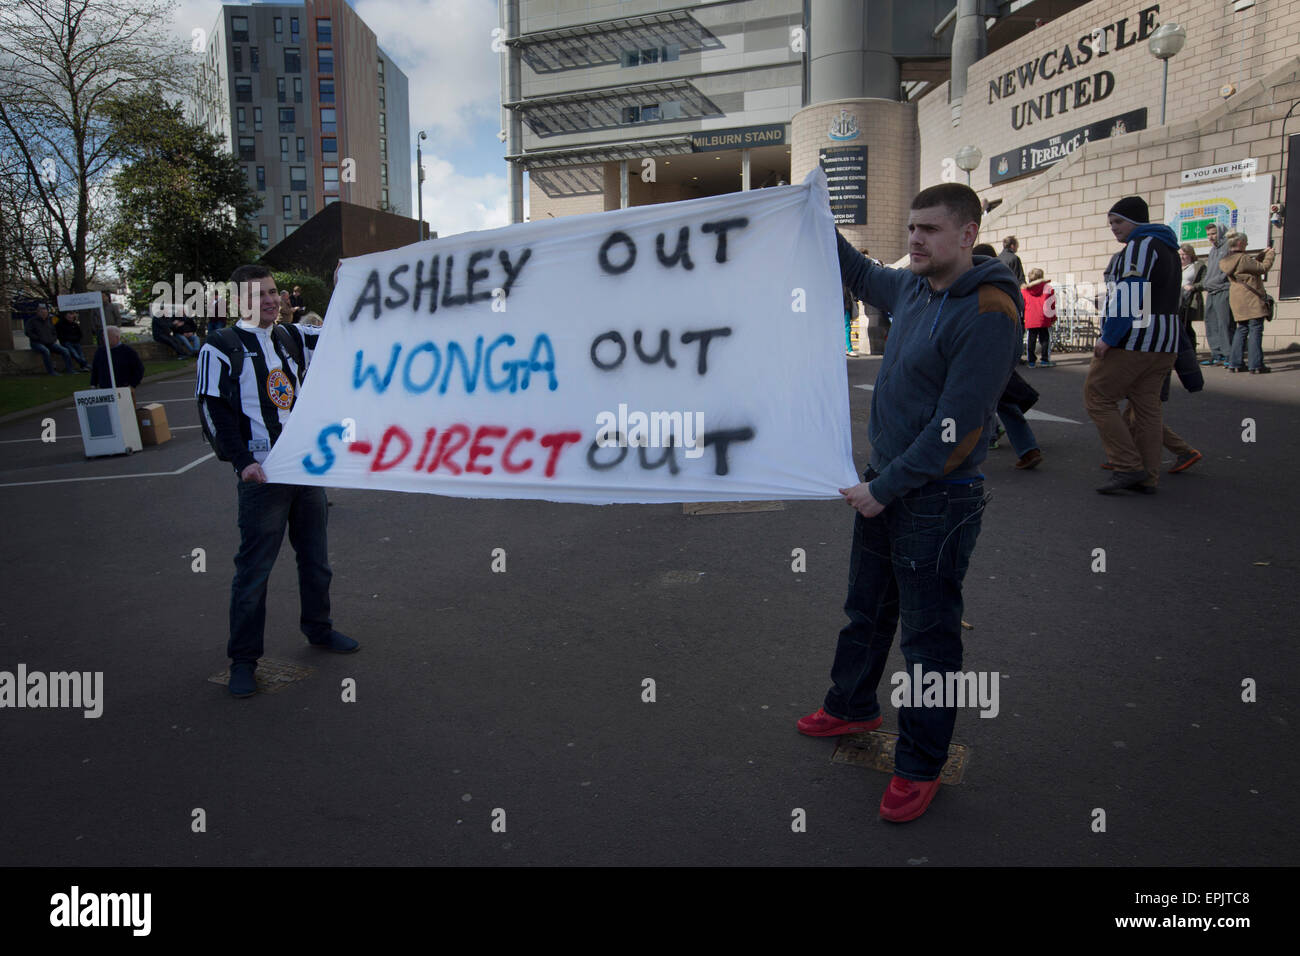 Supporters showing off a protest banner at the Gallowgate end of the stadium before Newcastle United host Tottenham Hotspurs in an English Premier League match at St. James' Park. The match was boycotted by a section of the home support critical of the role of owner Mike Ashley and sponsorship by a payday loan company. The match was won by Spurs by 3-1, watched by 47,427, the lowest league gate of the season at the stadium. Stock Photo